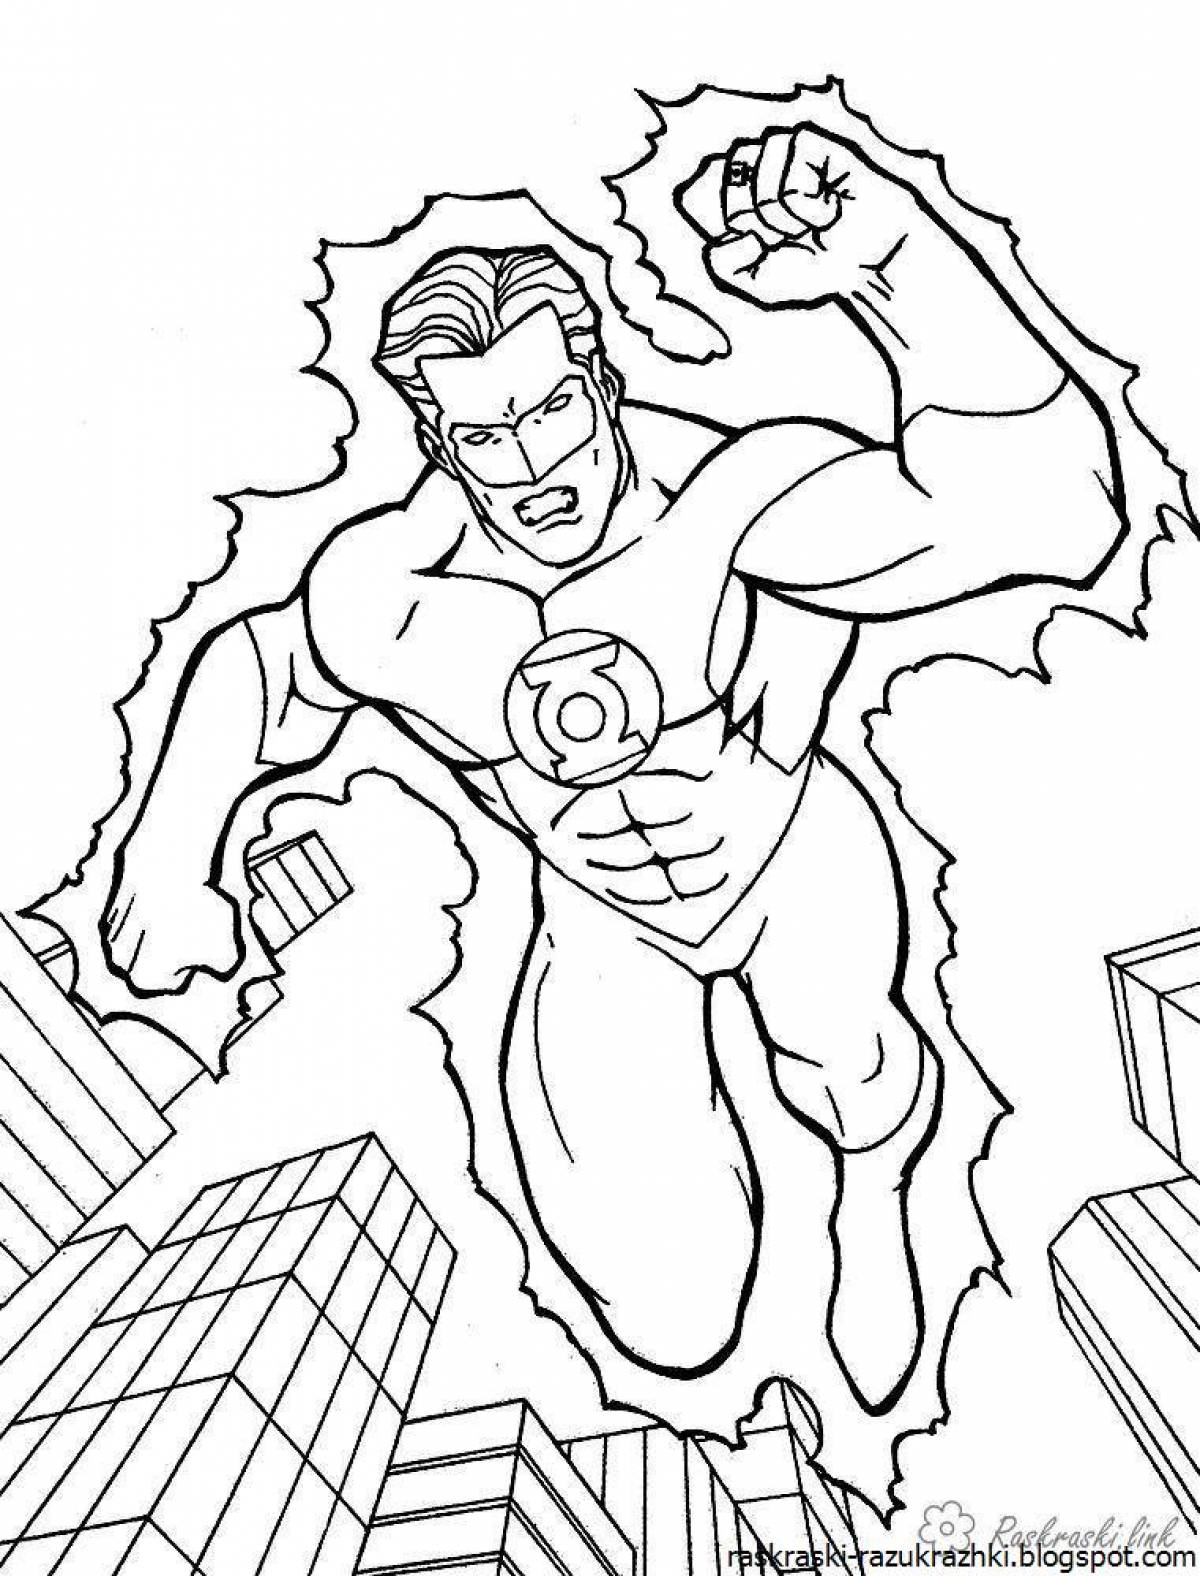 Majestic superhero coloring pages for boys